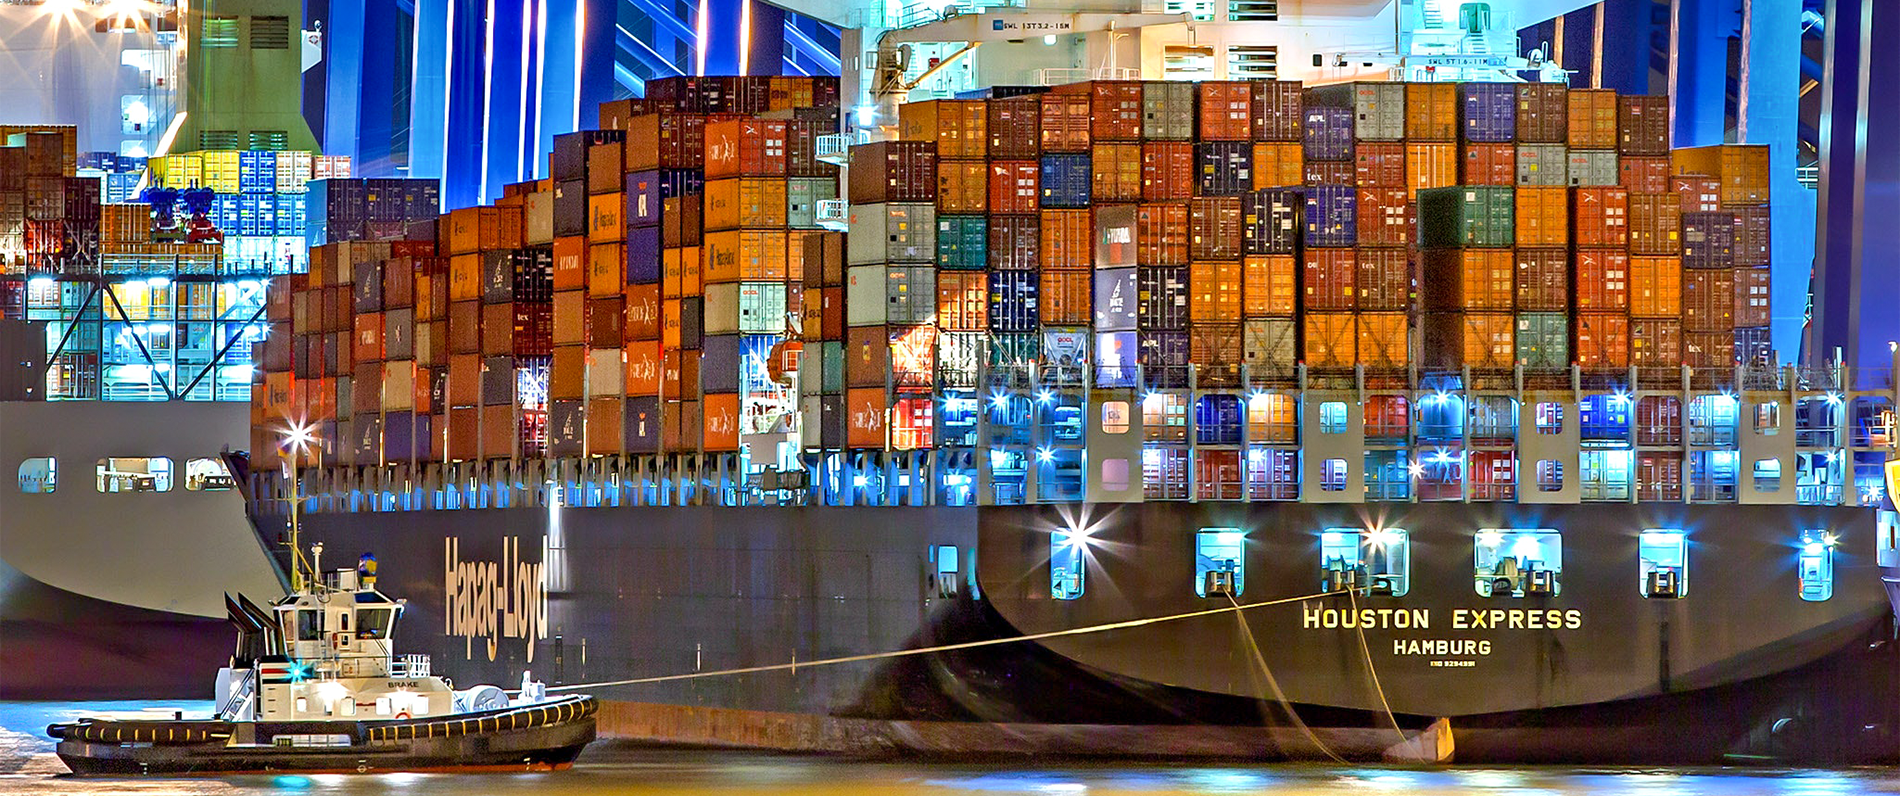 thousands of containers on a container ship